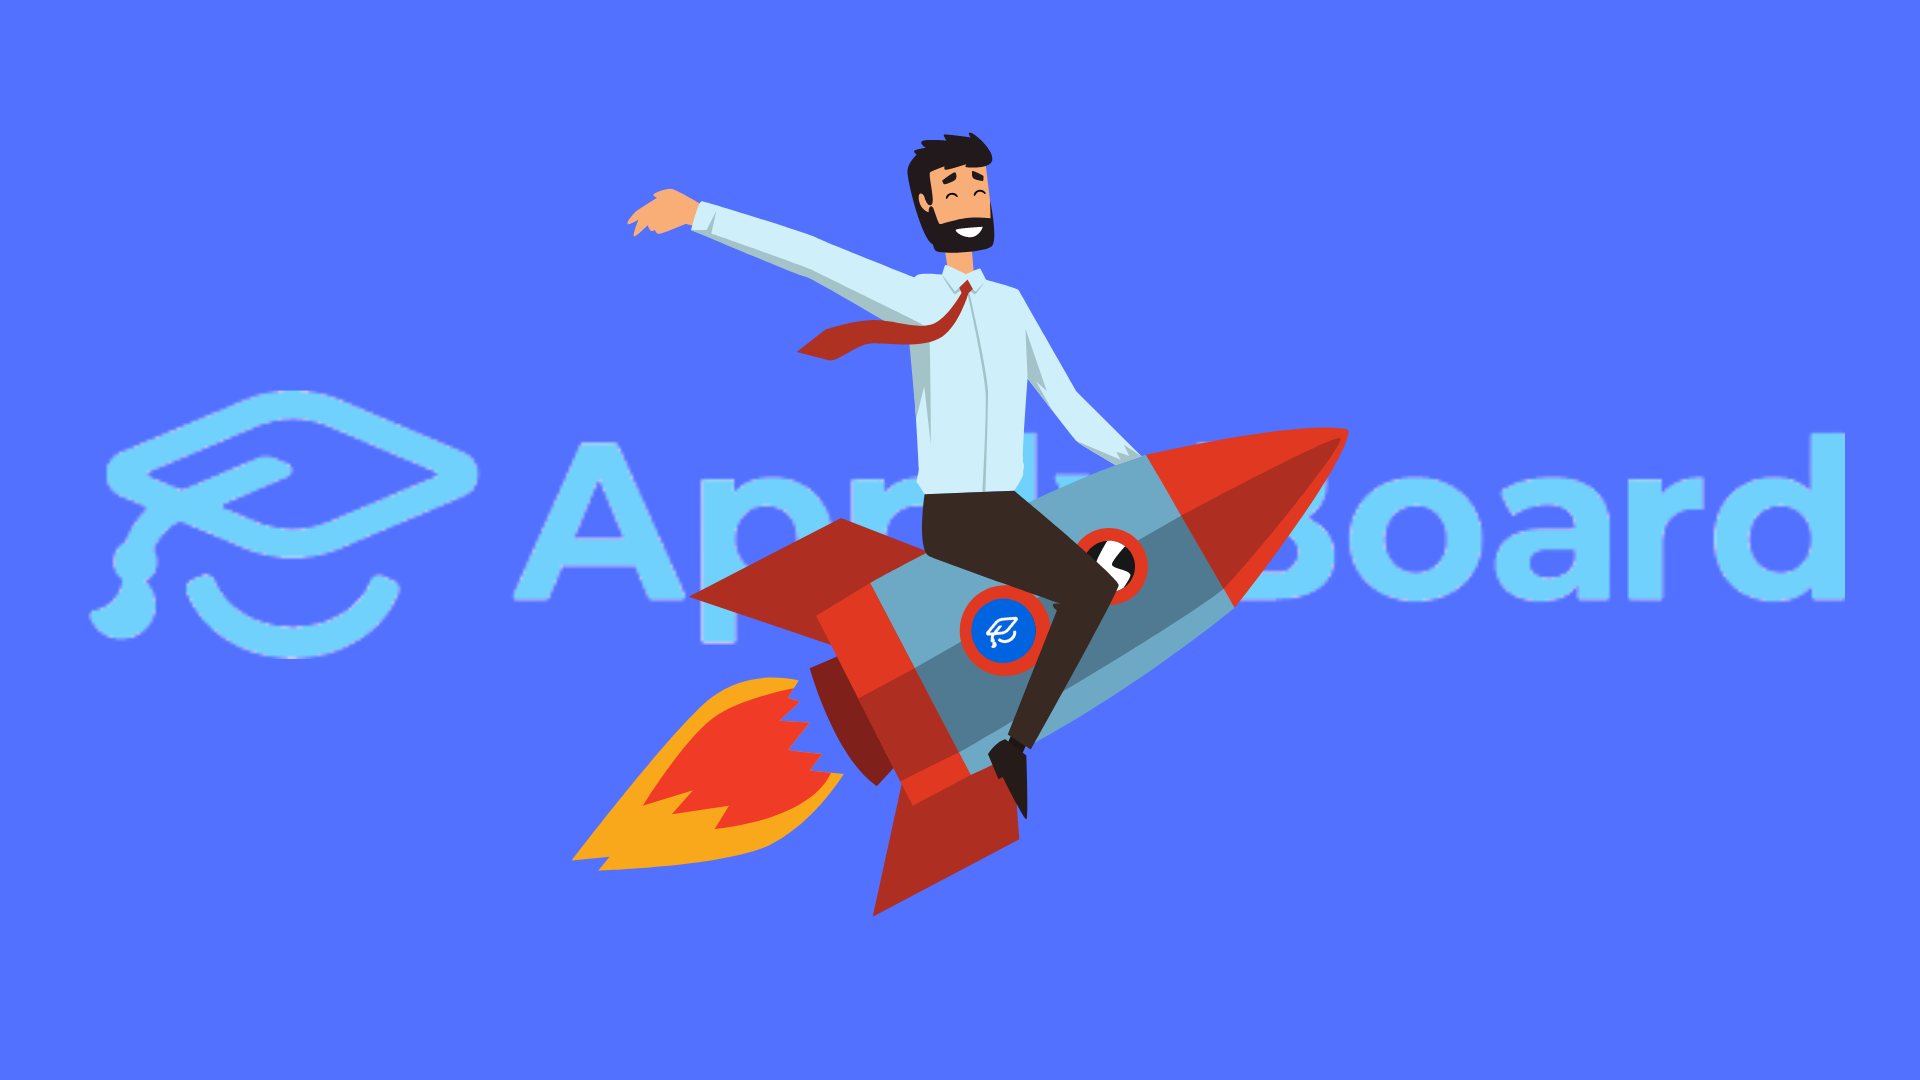 ApplyBoard – riding the rocket ship to an IPO?